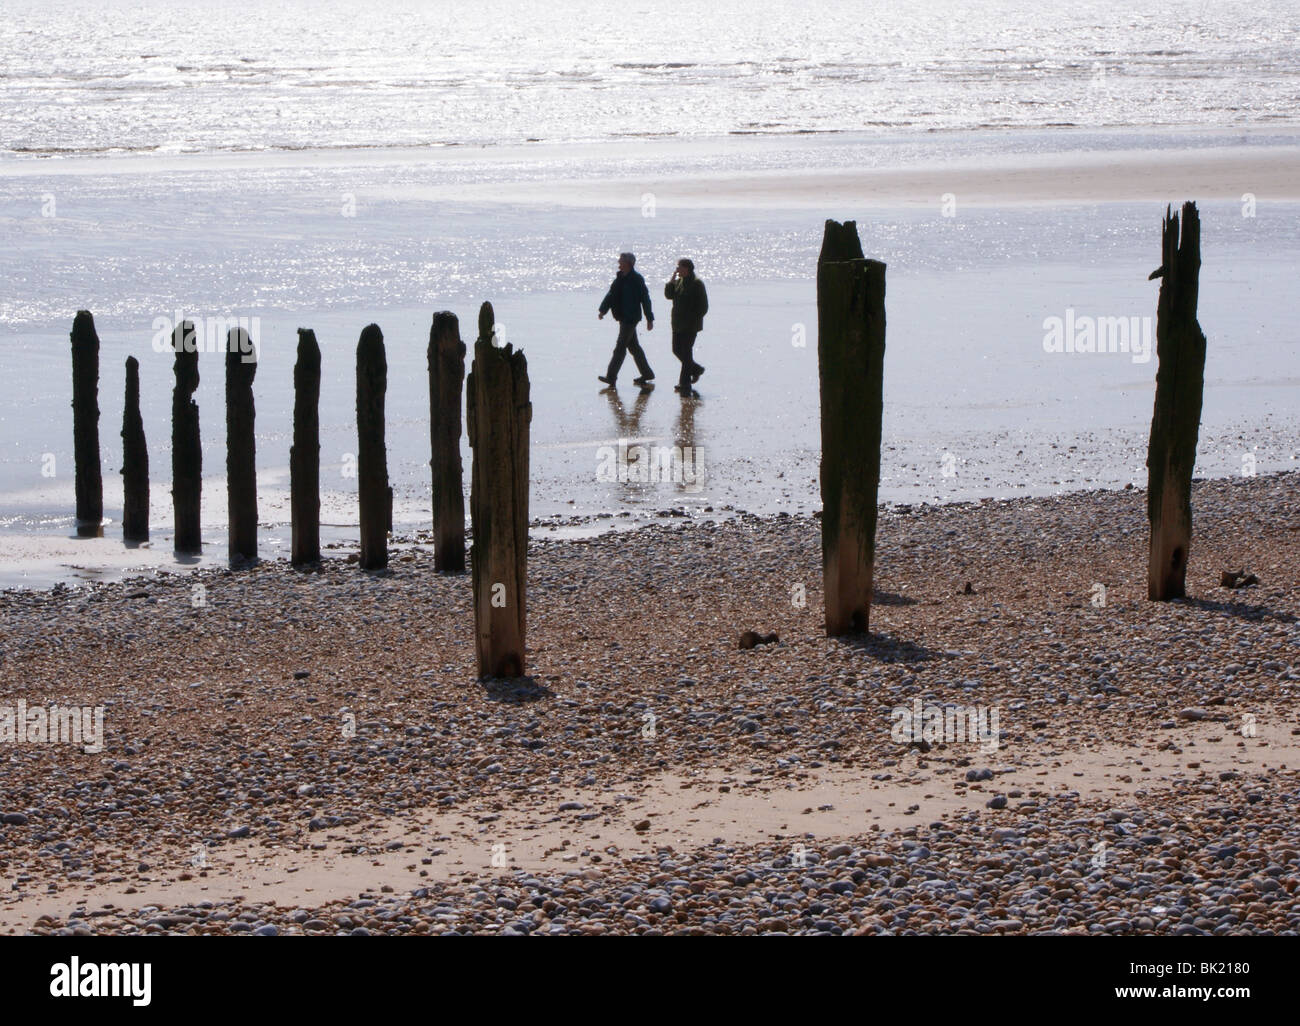 Two people in the distance walking on a beach in East Sussex. The upright wooden posts are the remains of old sea defences. Stock Photo